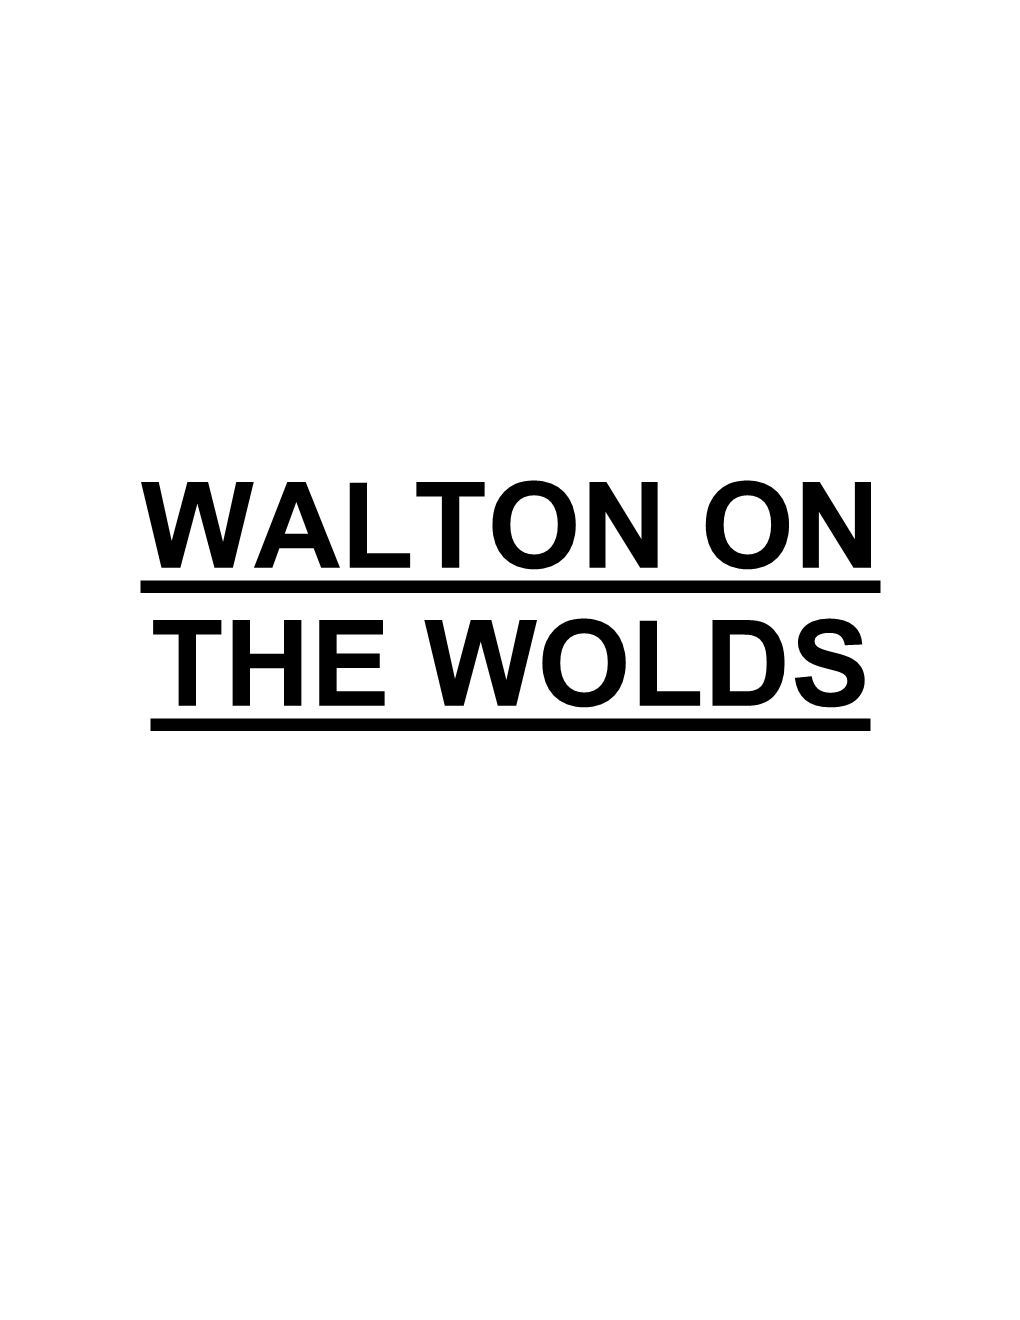 Walton on the Wolds